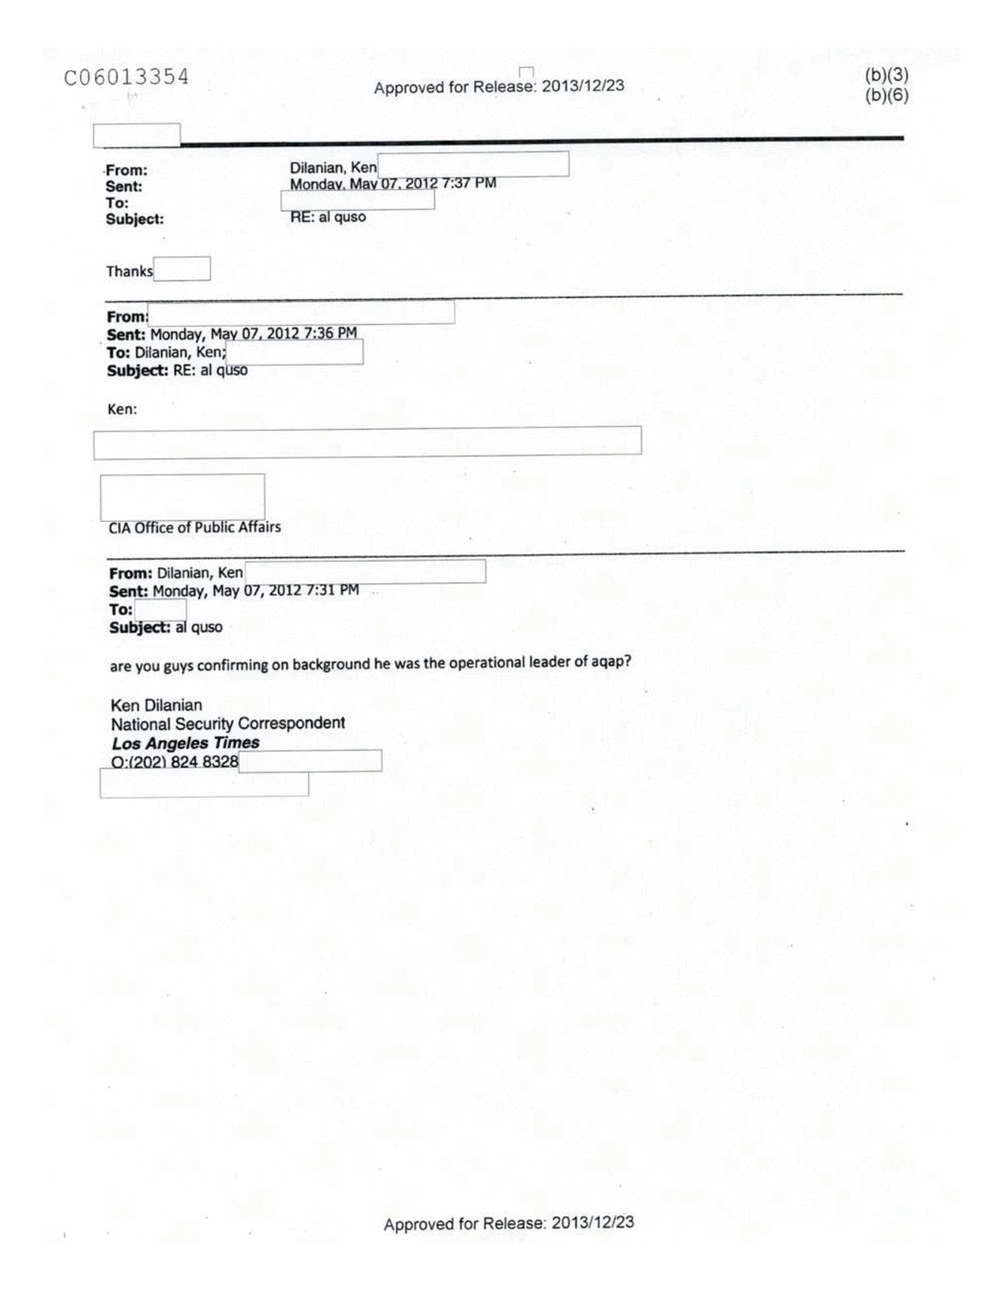 Page 267 from Email Correspondence Between Reporters and CIA Flacks